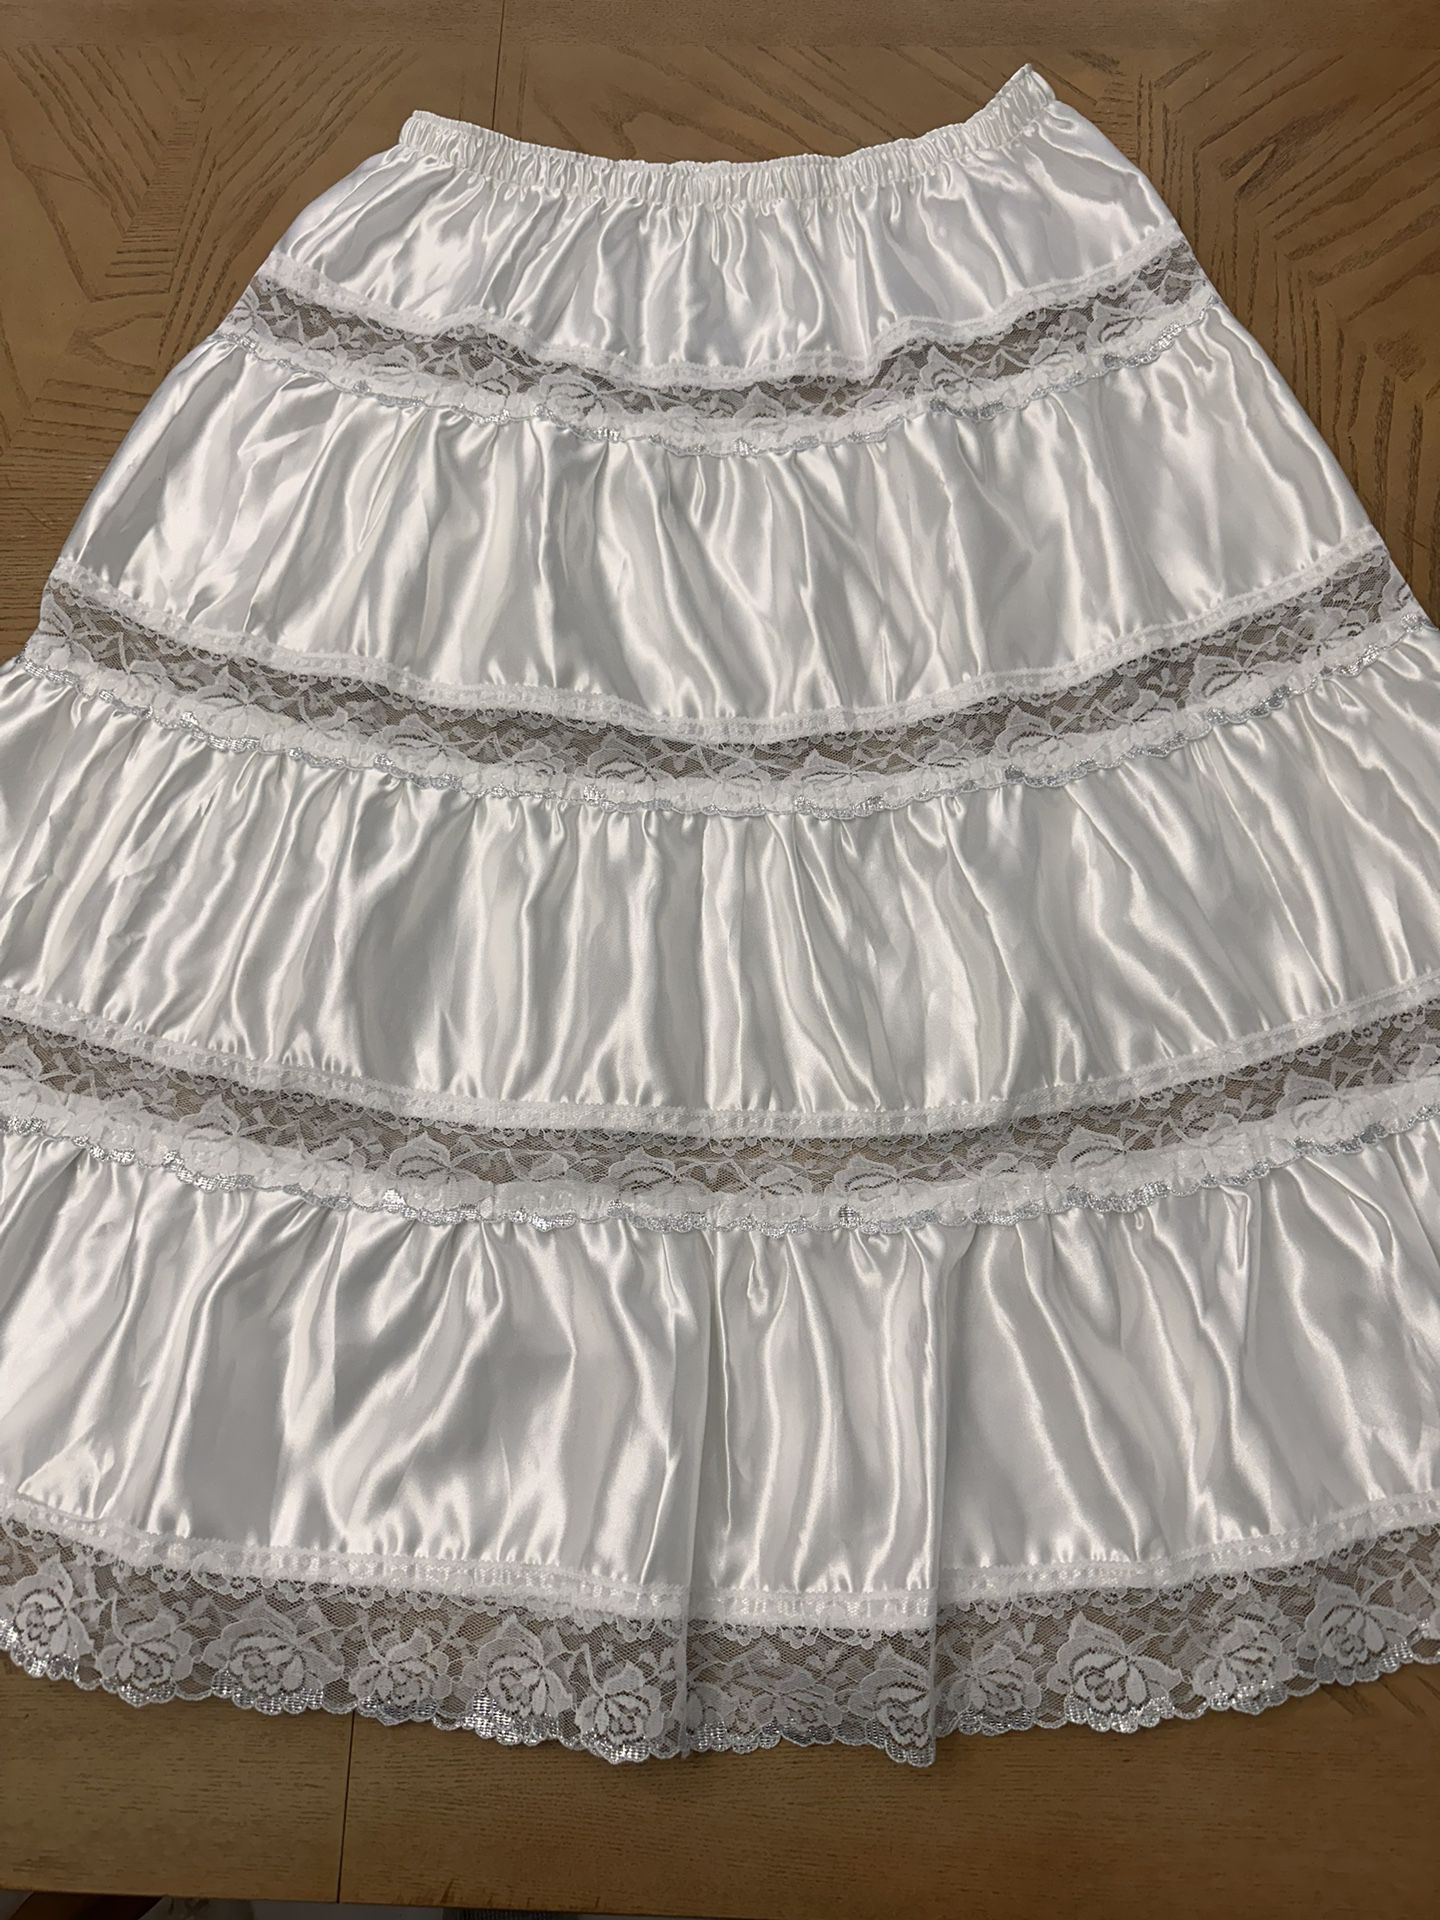 Woman’s skirt white satin and lace  Waist 15” Length 36”